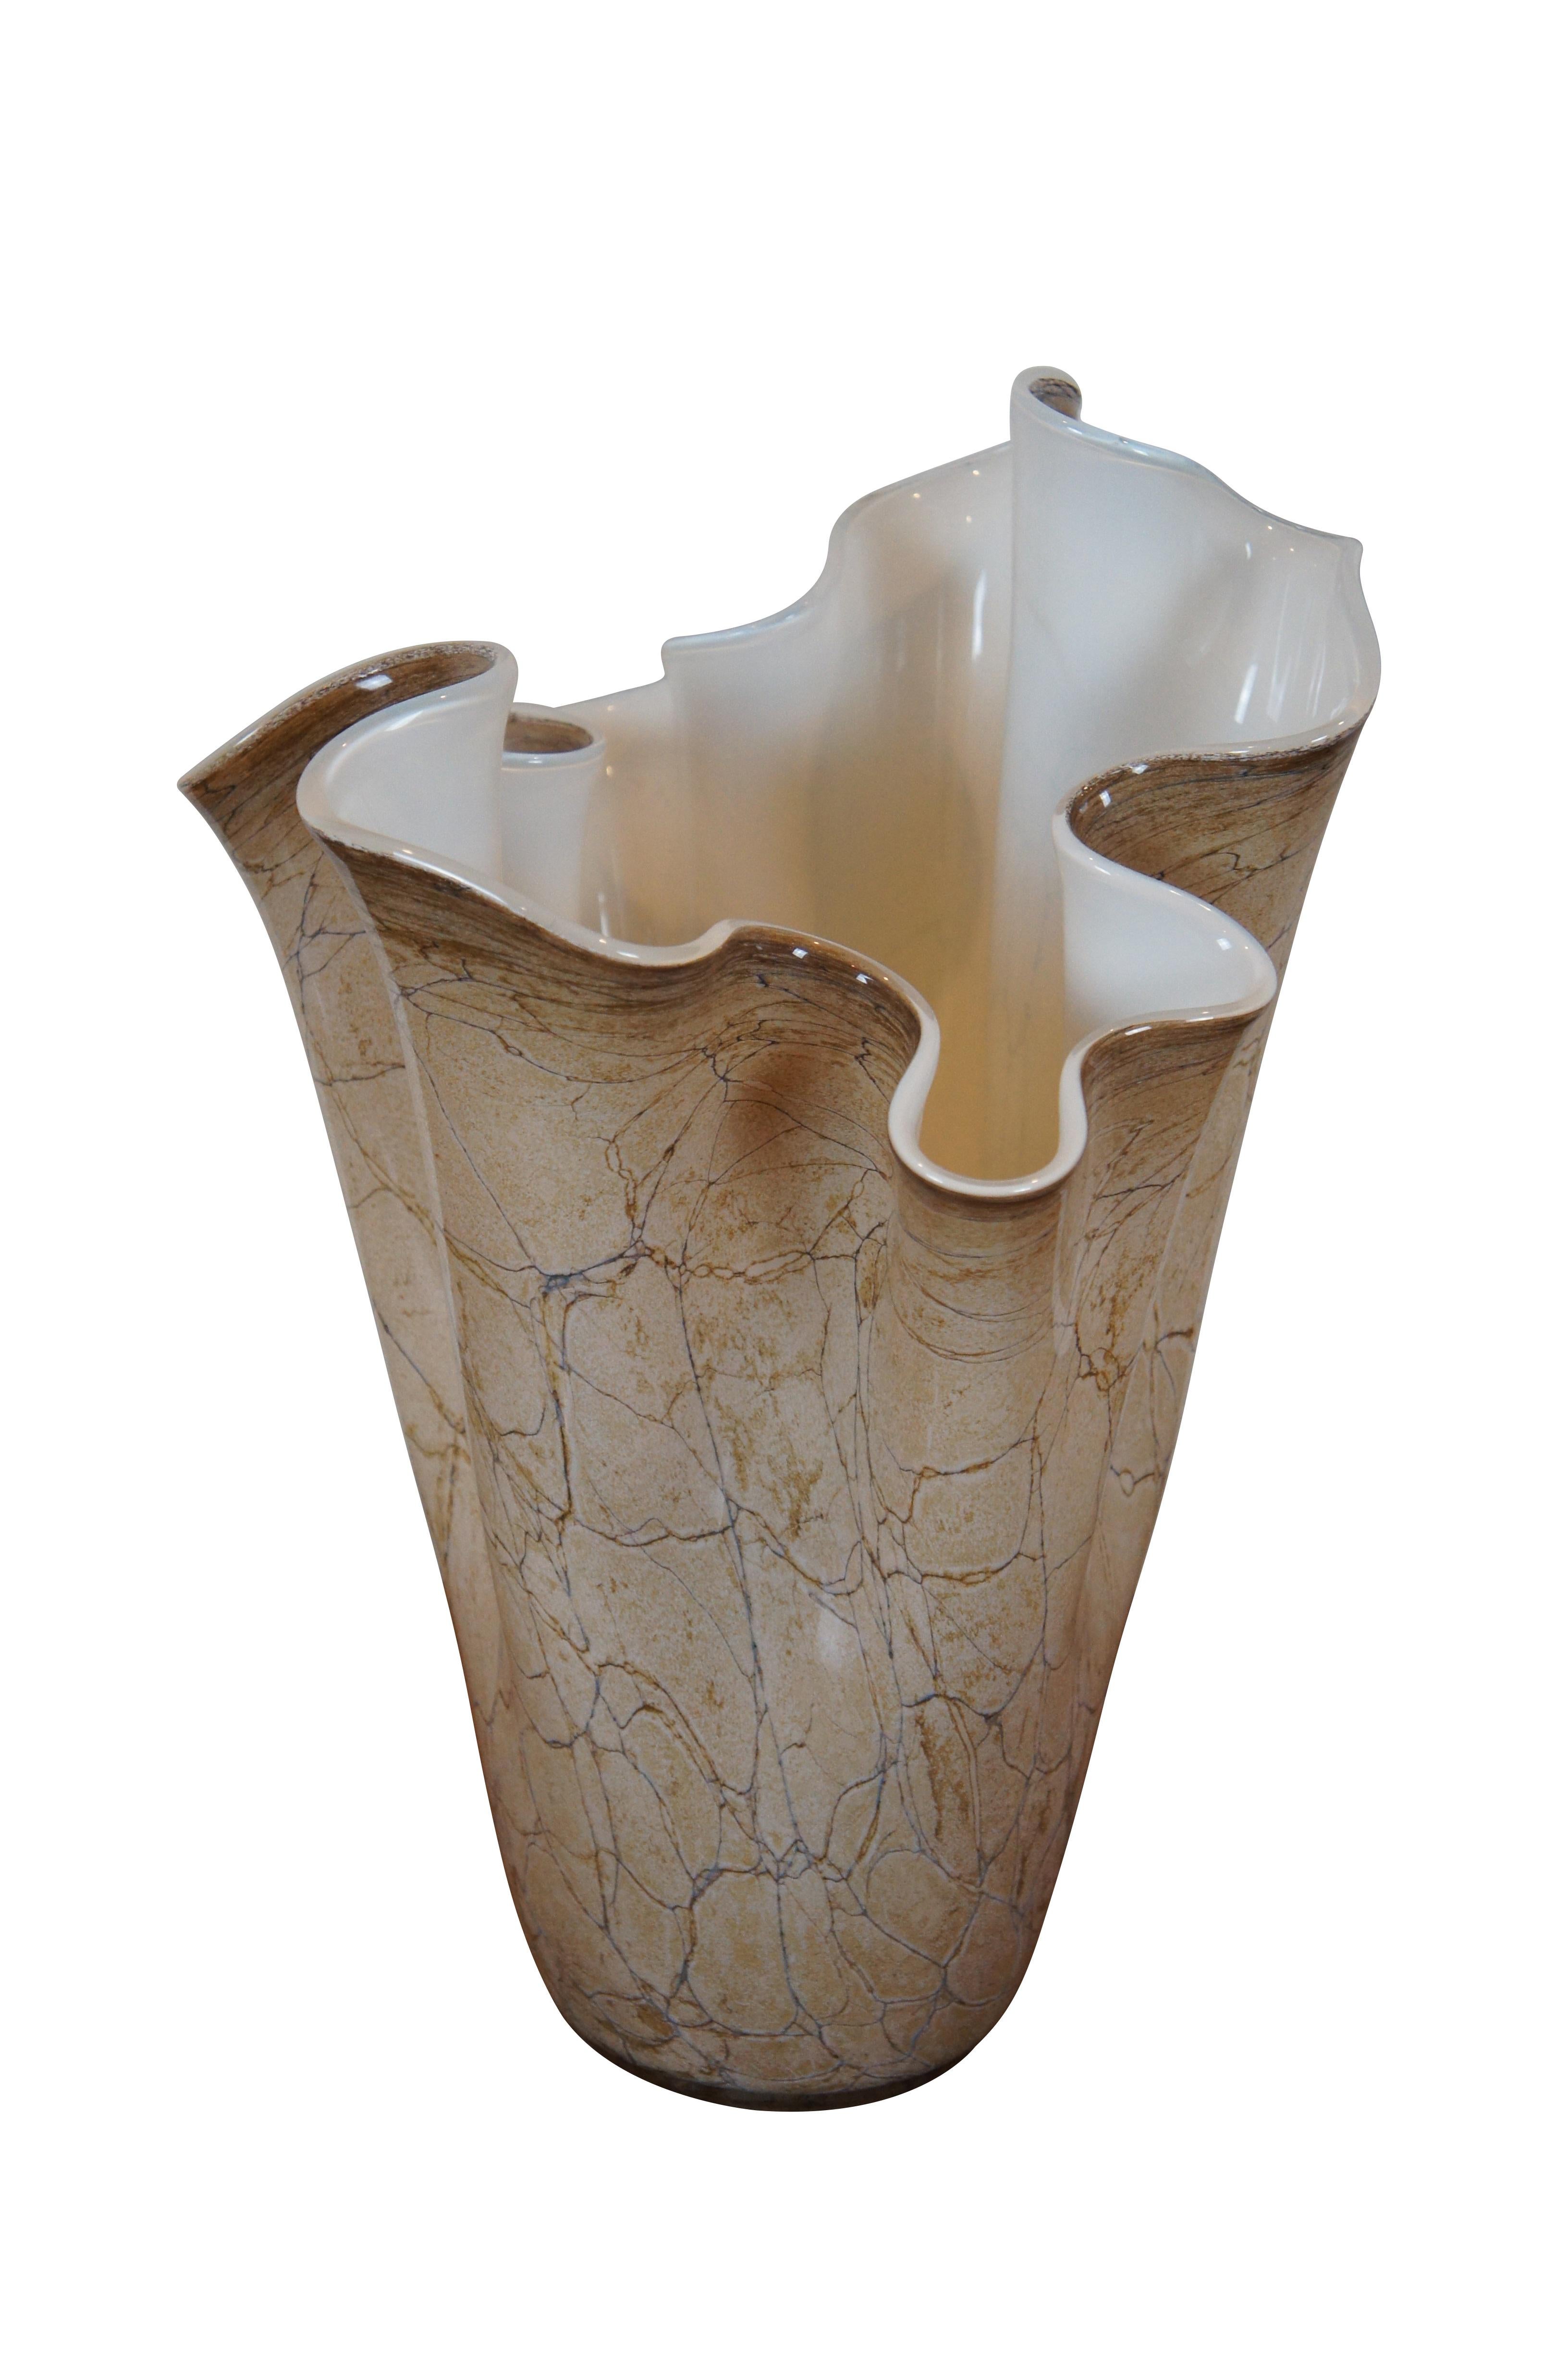 Large vintage Polish hand blown art glass centerpiece flower vase featuring a brown marble ruffled handkerchief design.  Made in Poland by Zorza.

Dimensions:
12